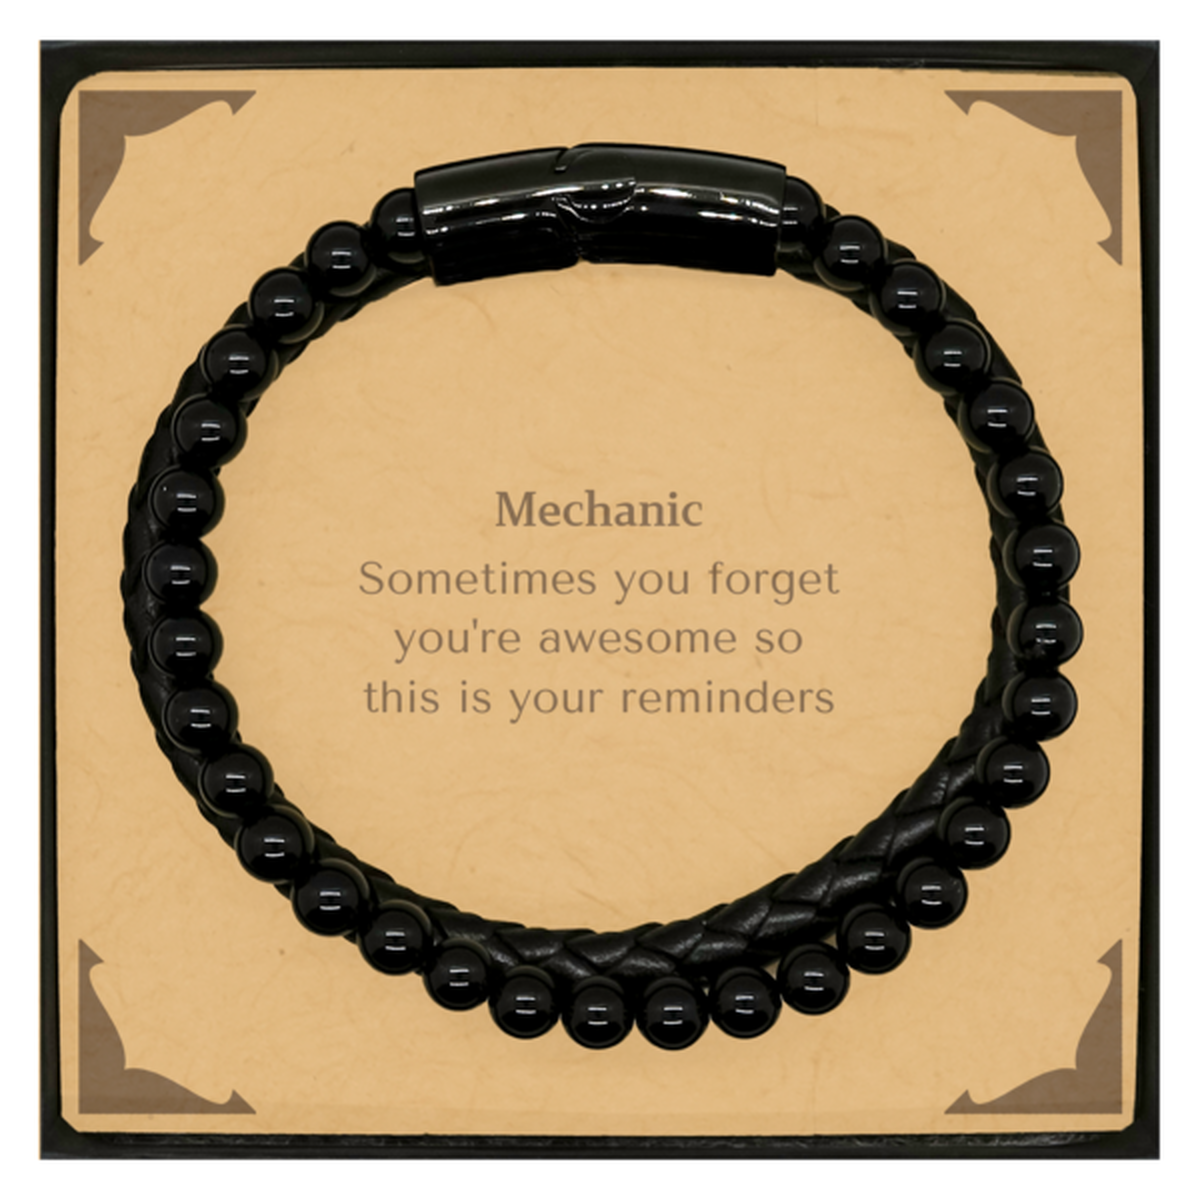 Sentimental Mechanic Stone Leather Bracelets, Mechanic Sometimes you forget you're awesome so this is your reminders, Graduation Christmas Birthday Gifts for Mechanic, Men, Women, Coworkers